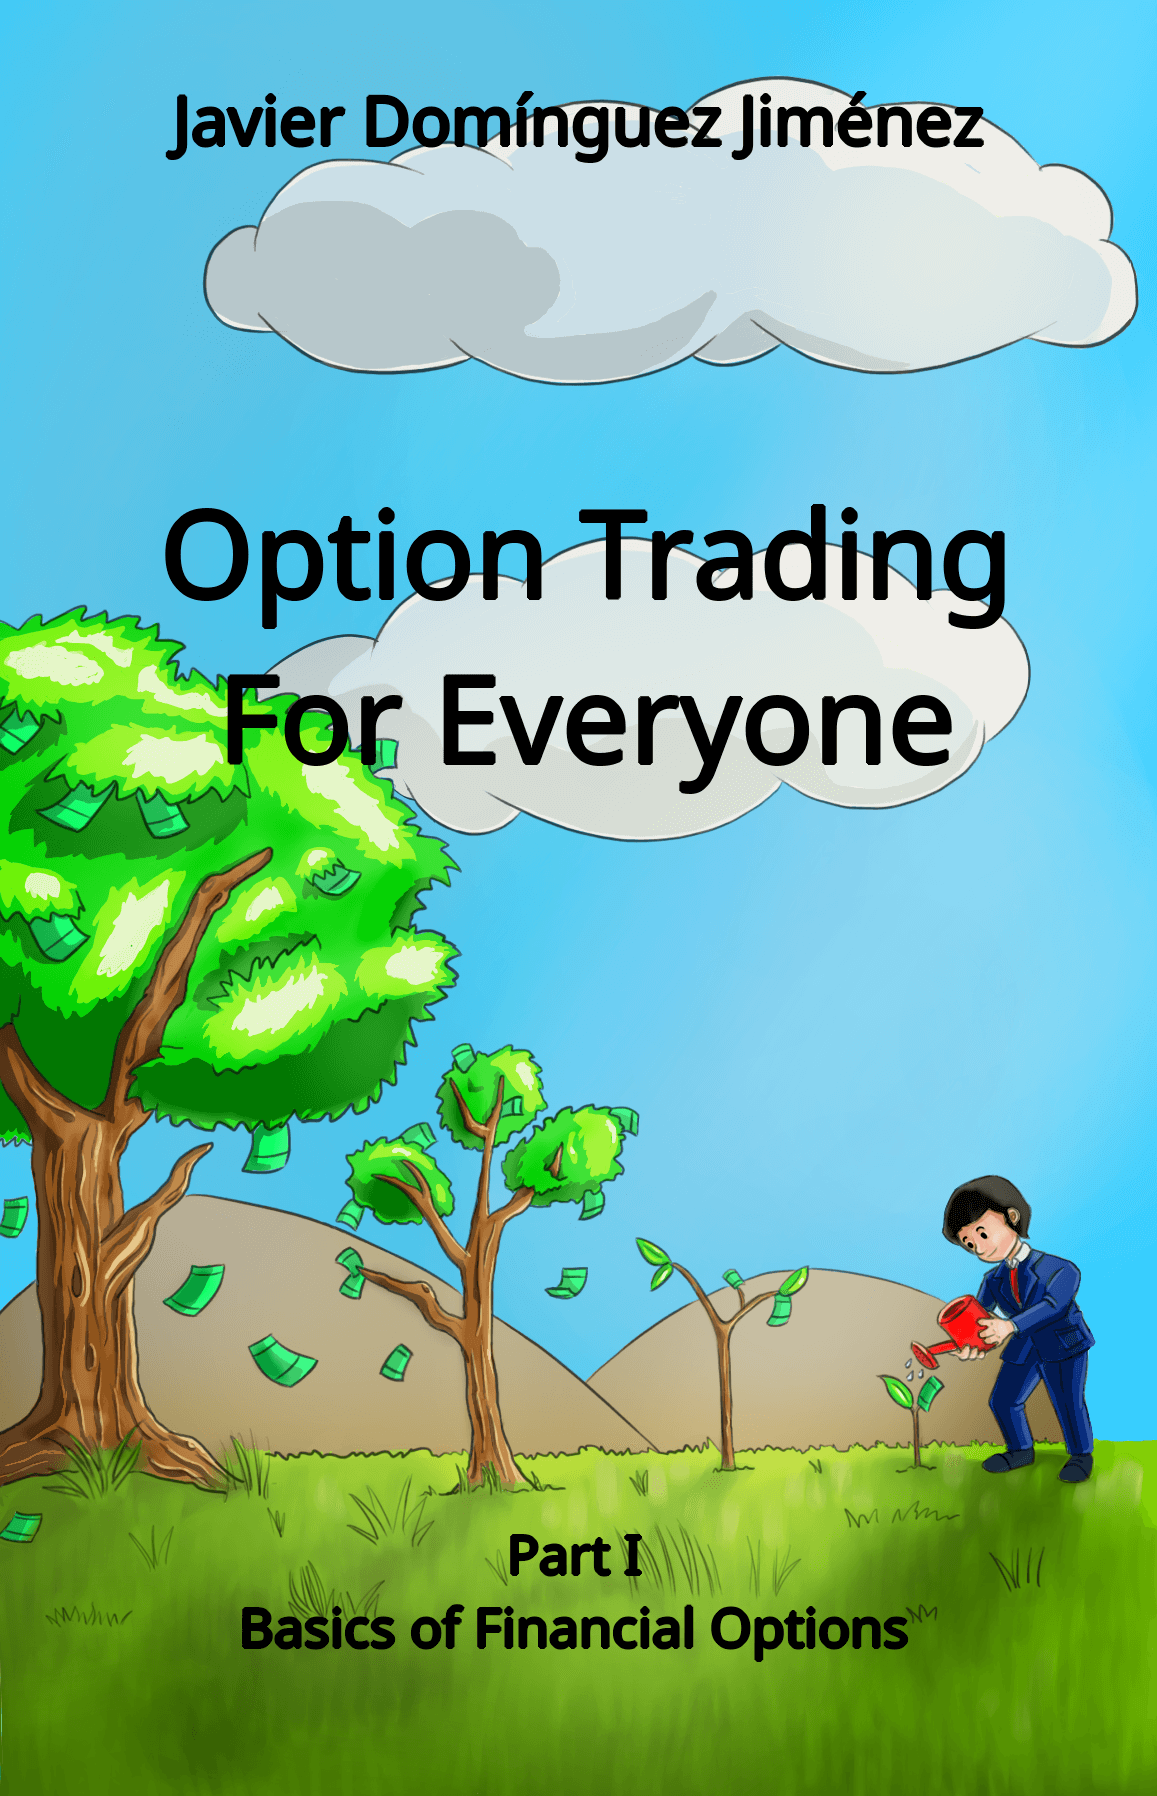 Option Trading For Everyone – Part I: Basics of Financial Options